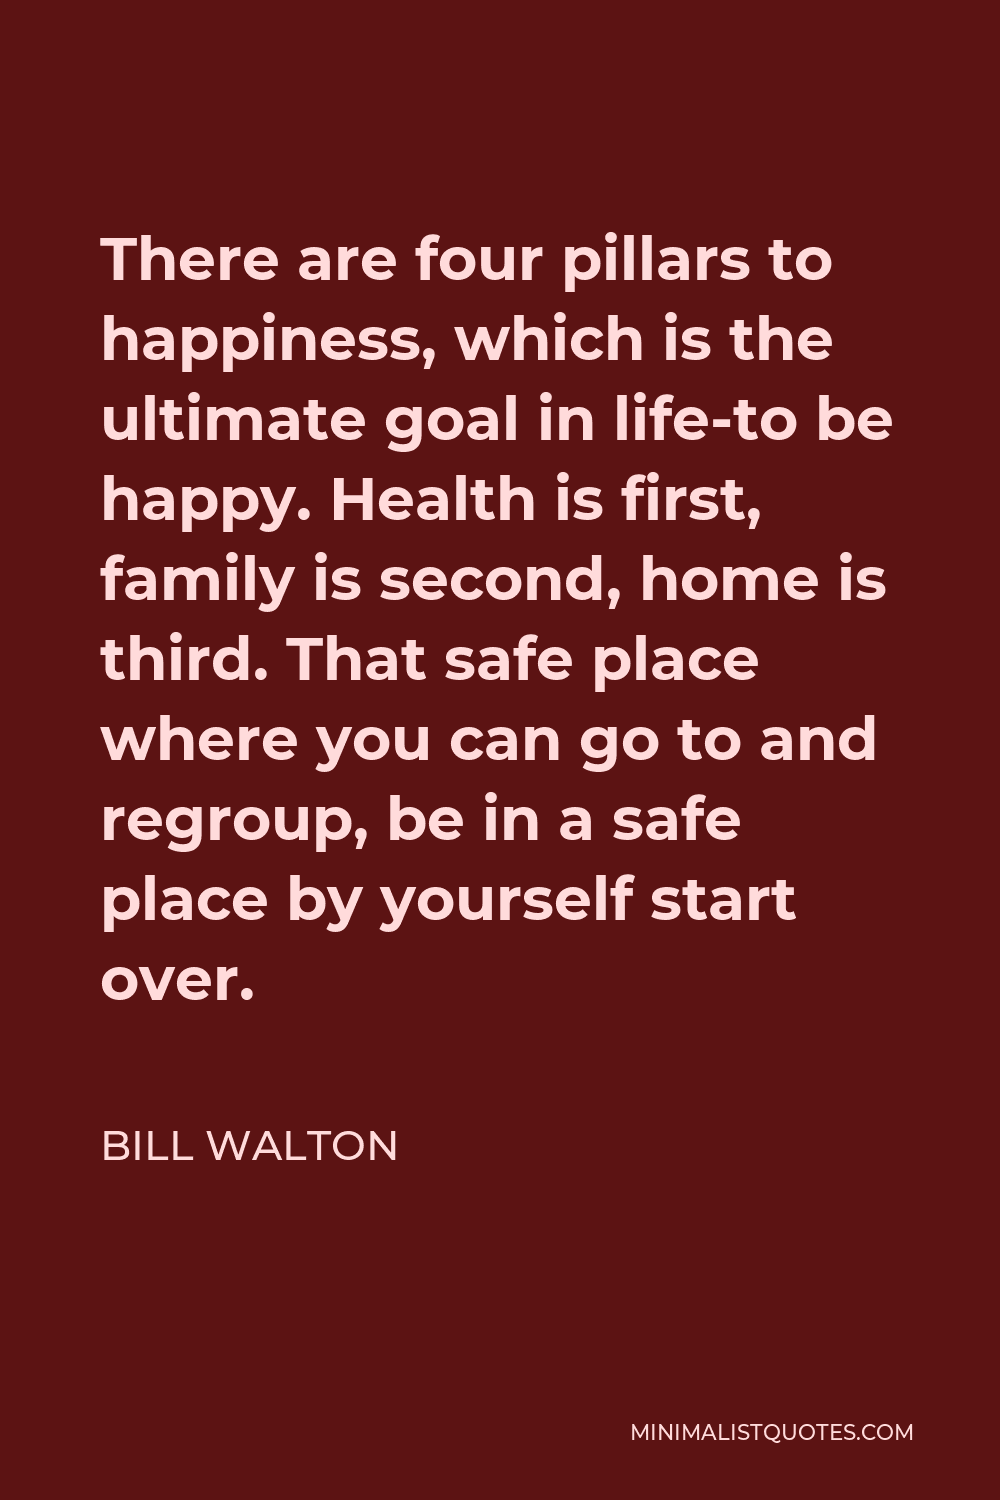 Bill Walton Quote - There are four pillars to happiness, which is the ultimate goal in life-to be happy. Health is first, family is second, home is third. That safe place where you can go to and regroup, be in a safe place by yourself start over.